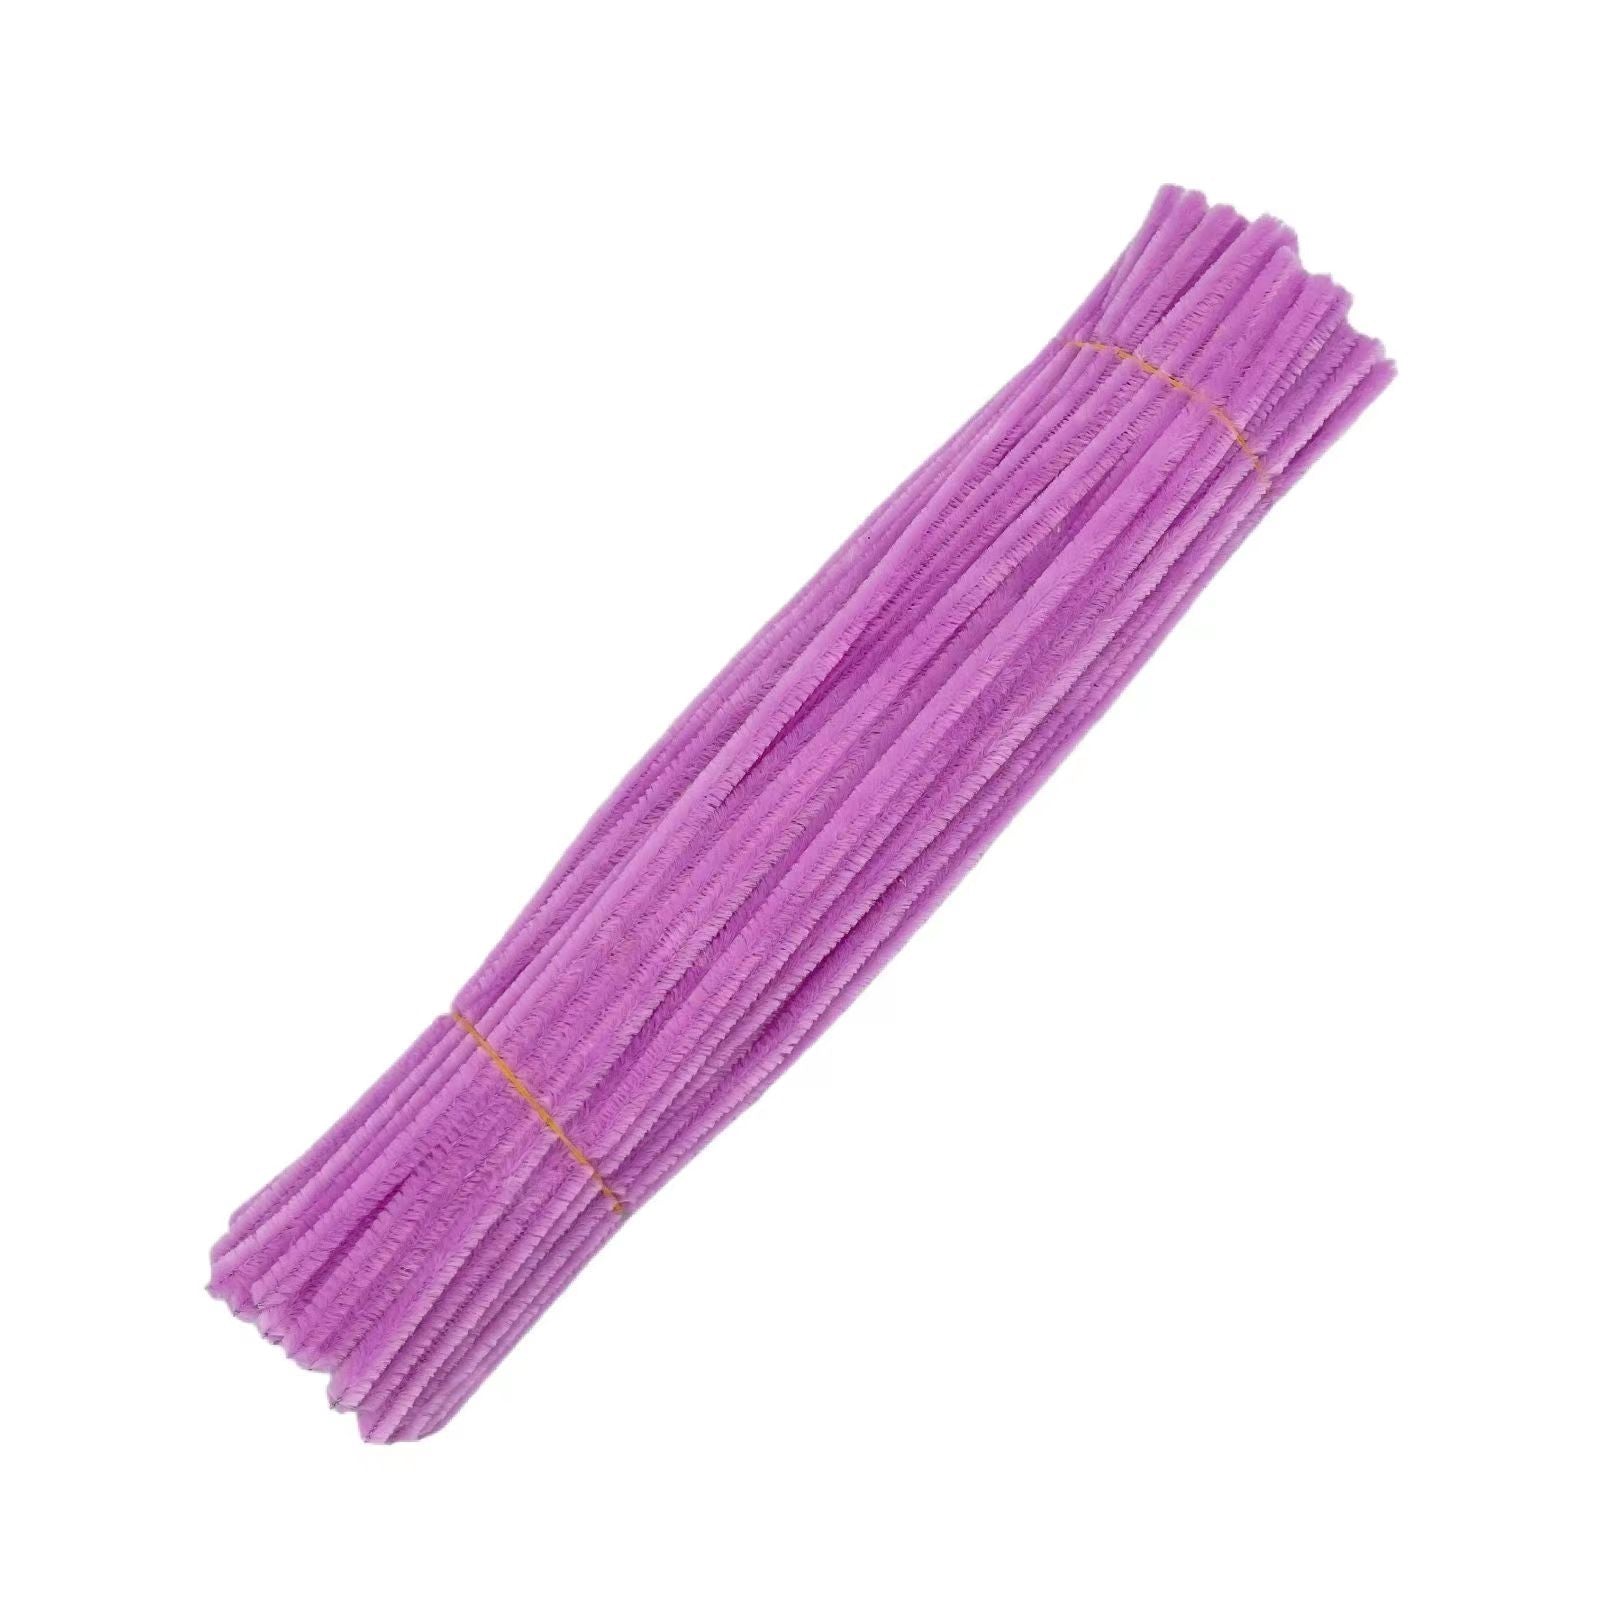 Pipe Cleaners- 100Pc. Pipe Cleaner Purple Pipe Cleaners-Chenille